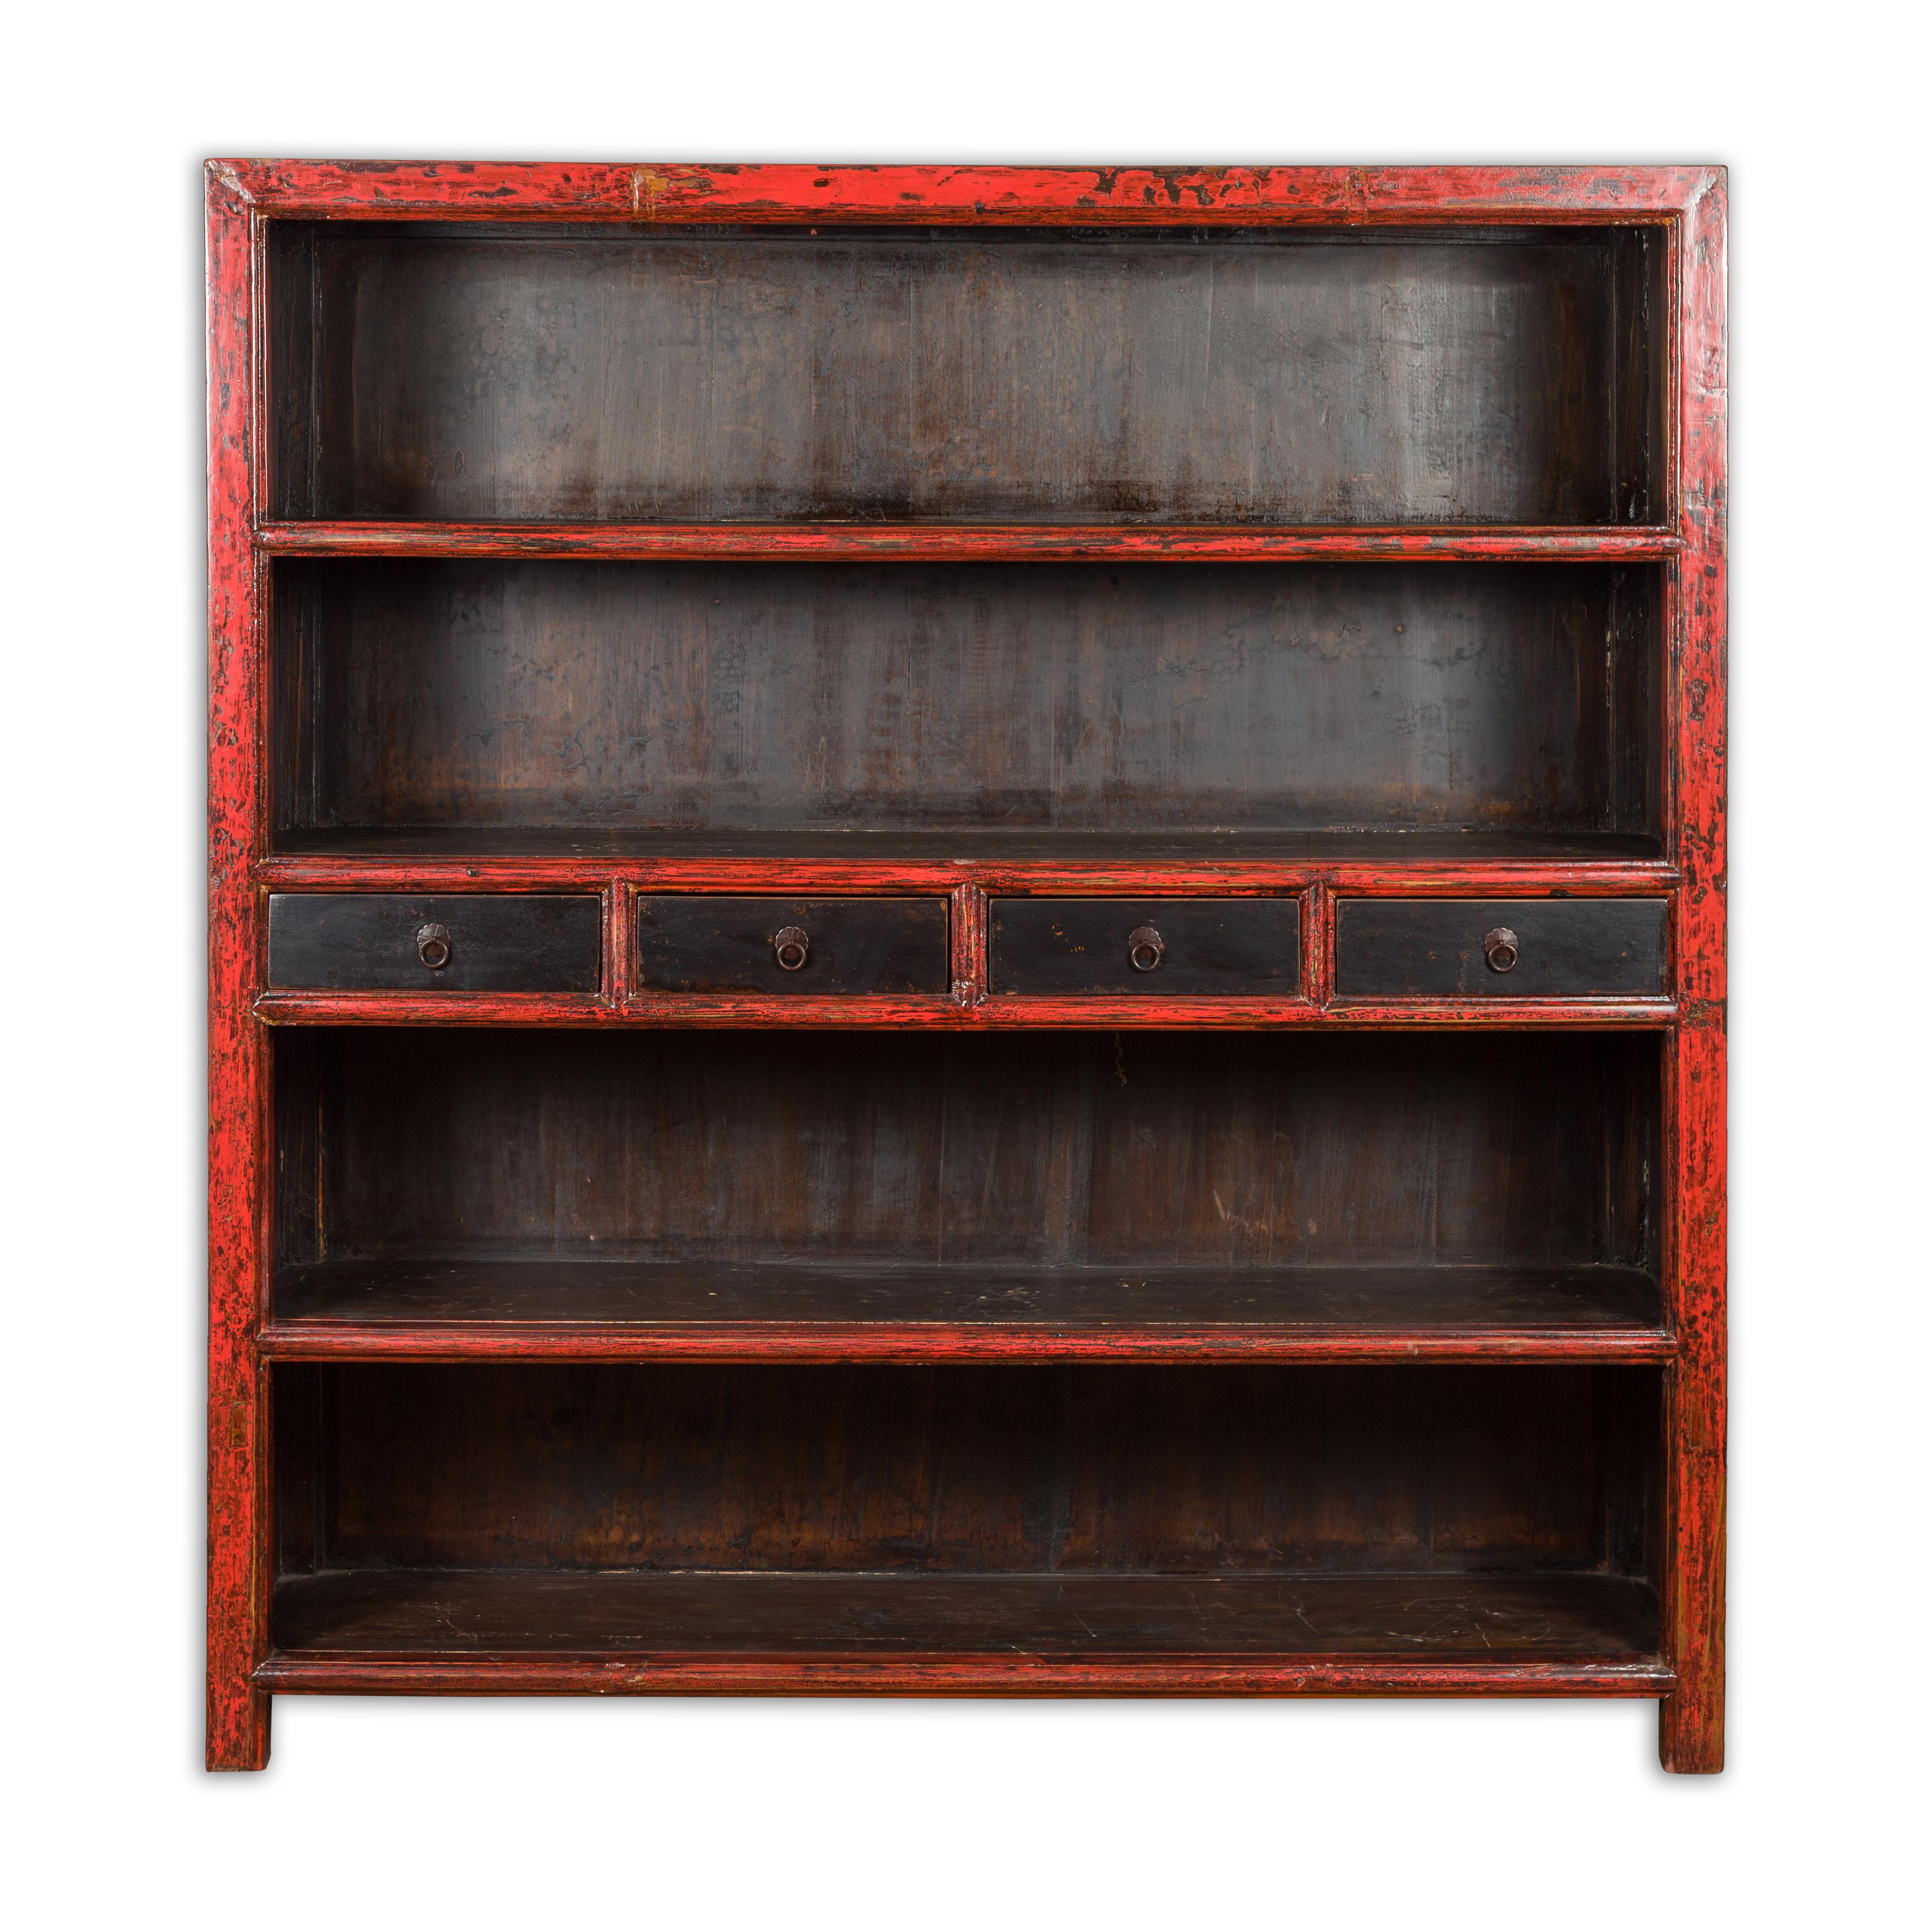 Chinese Qing Dynasty Period 19th Century Bookcase with Red and Brown Lacquer For Sale 13